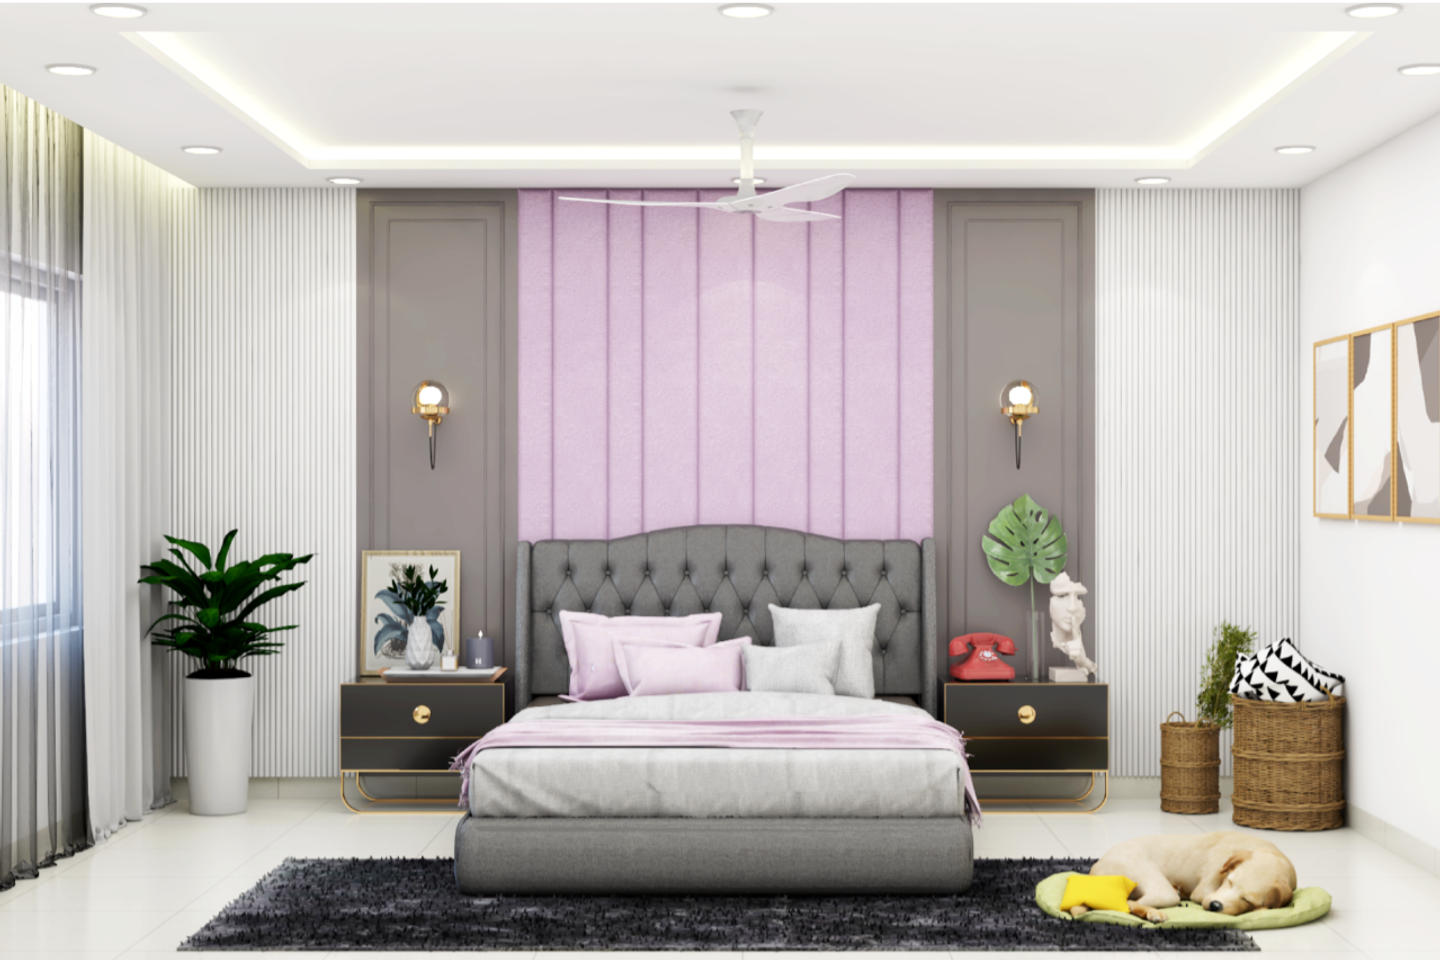 Bedroom with Pink Accent Wall - Livspace